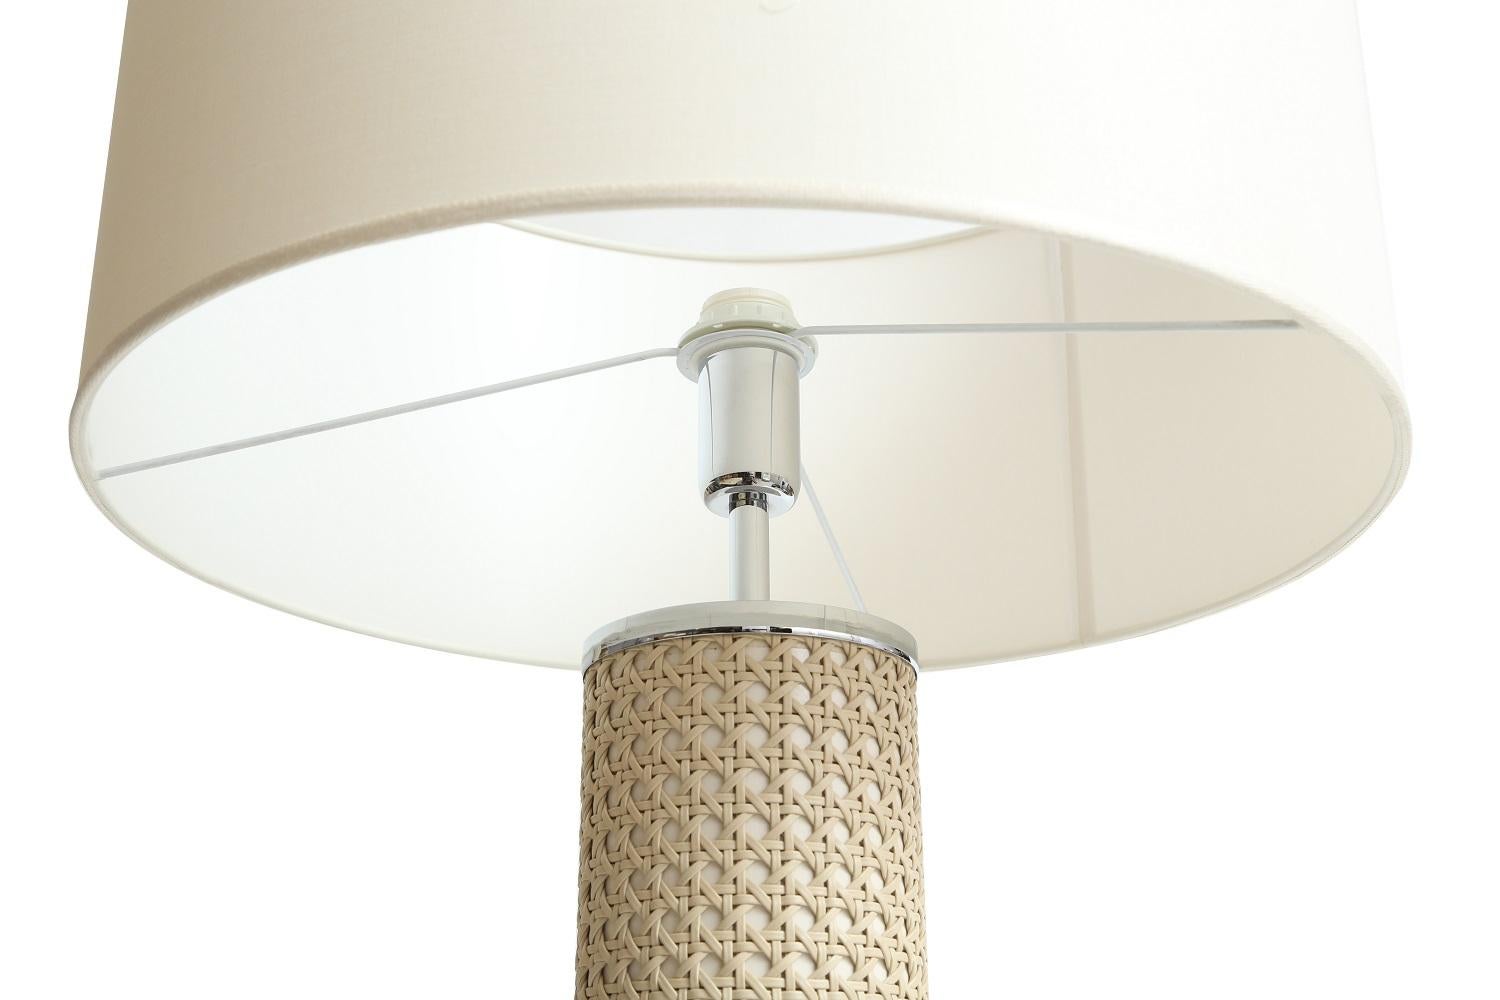 Riviere Italy Enameled Ivory Cylindrical Lamp covered with hand braided leather.
Made in Italy.

Dimensions:
20